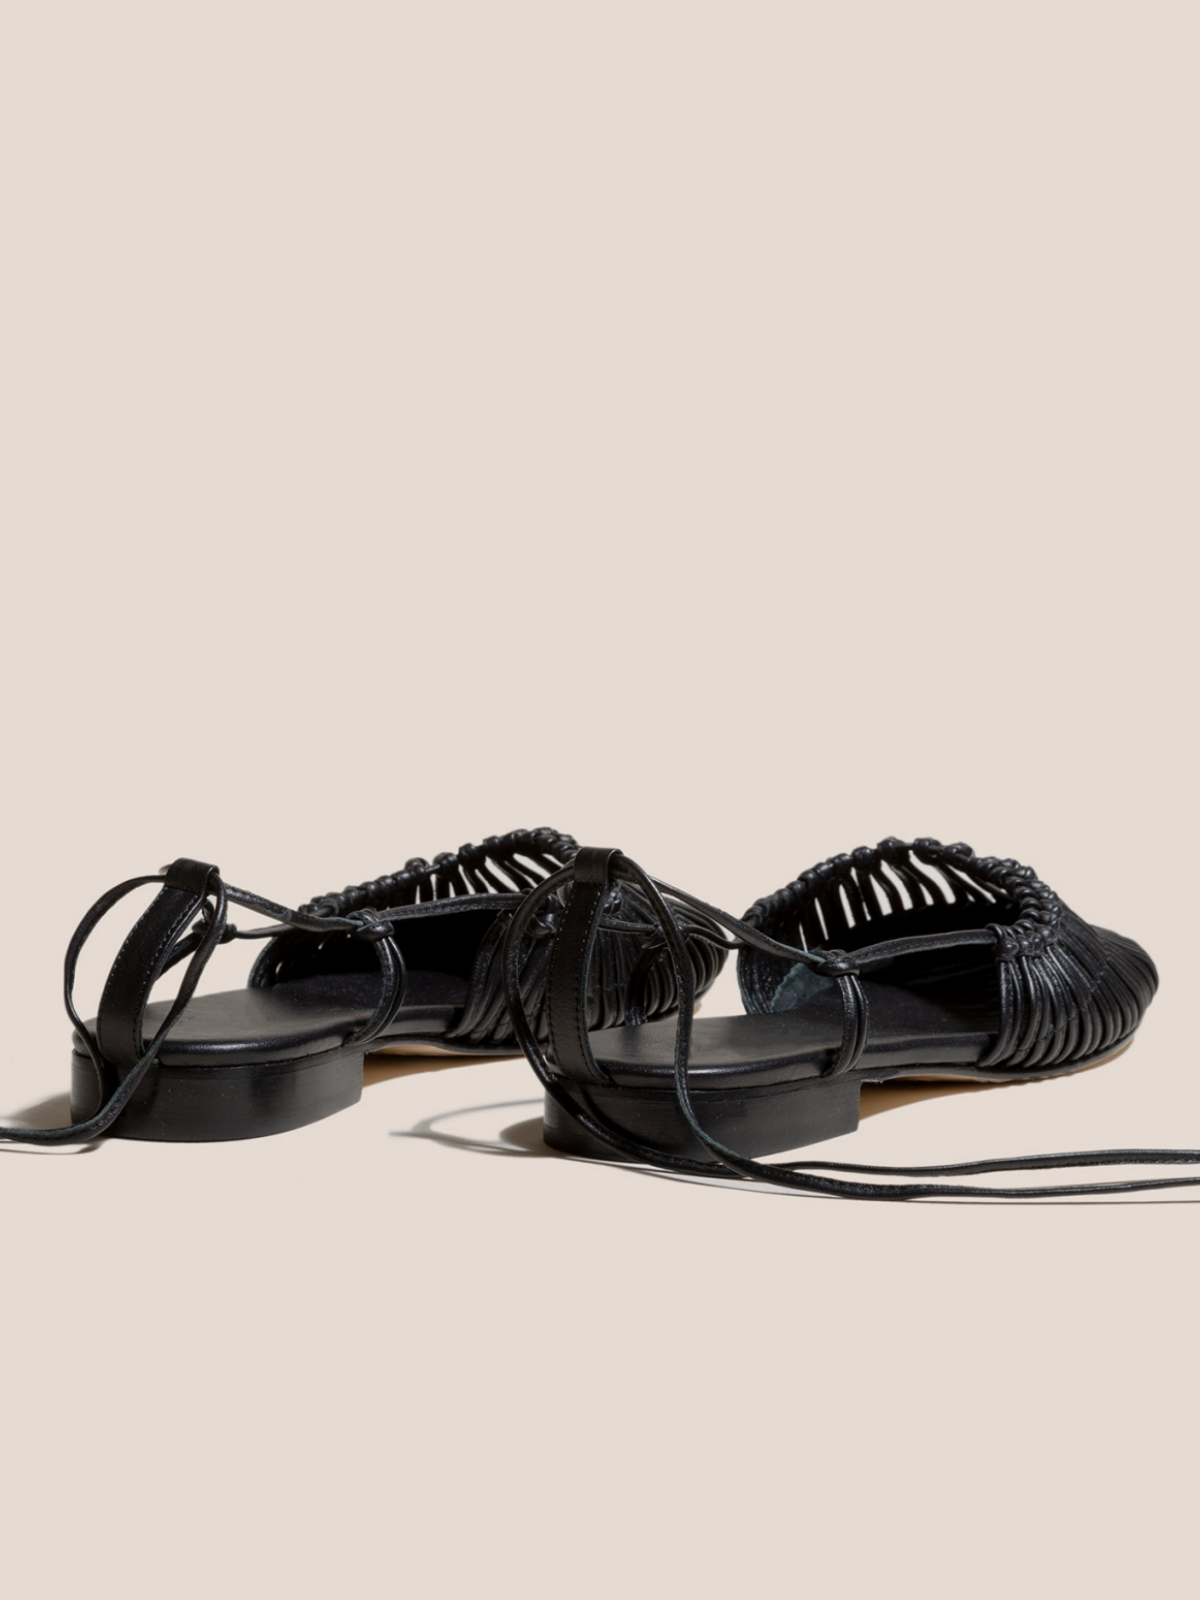 Black Knotted Strappy Semi-Hollow Round-Toe Flats Self-Tie Sandals